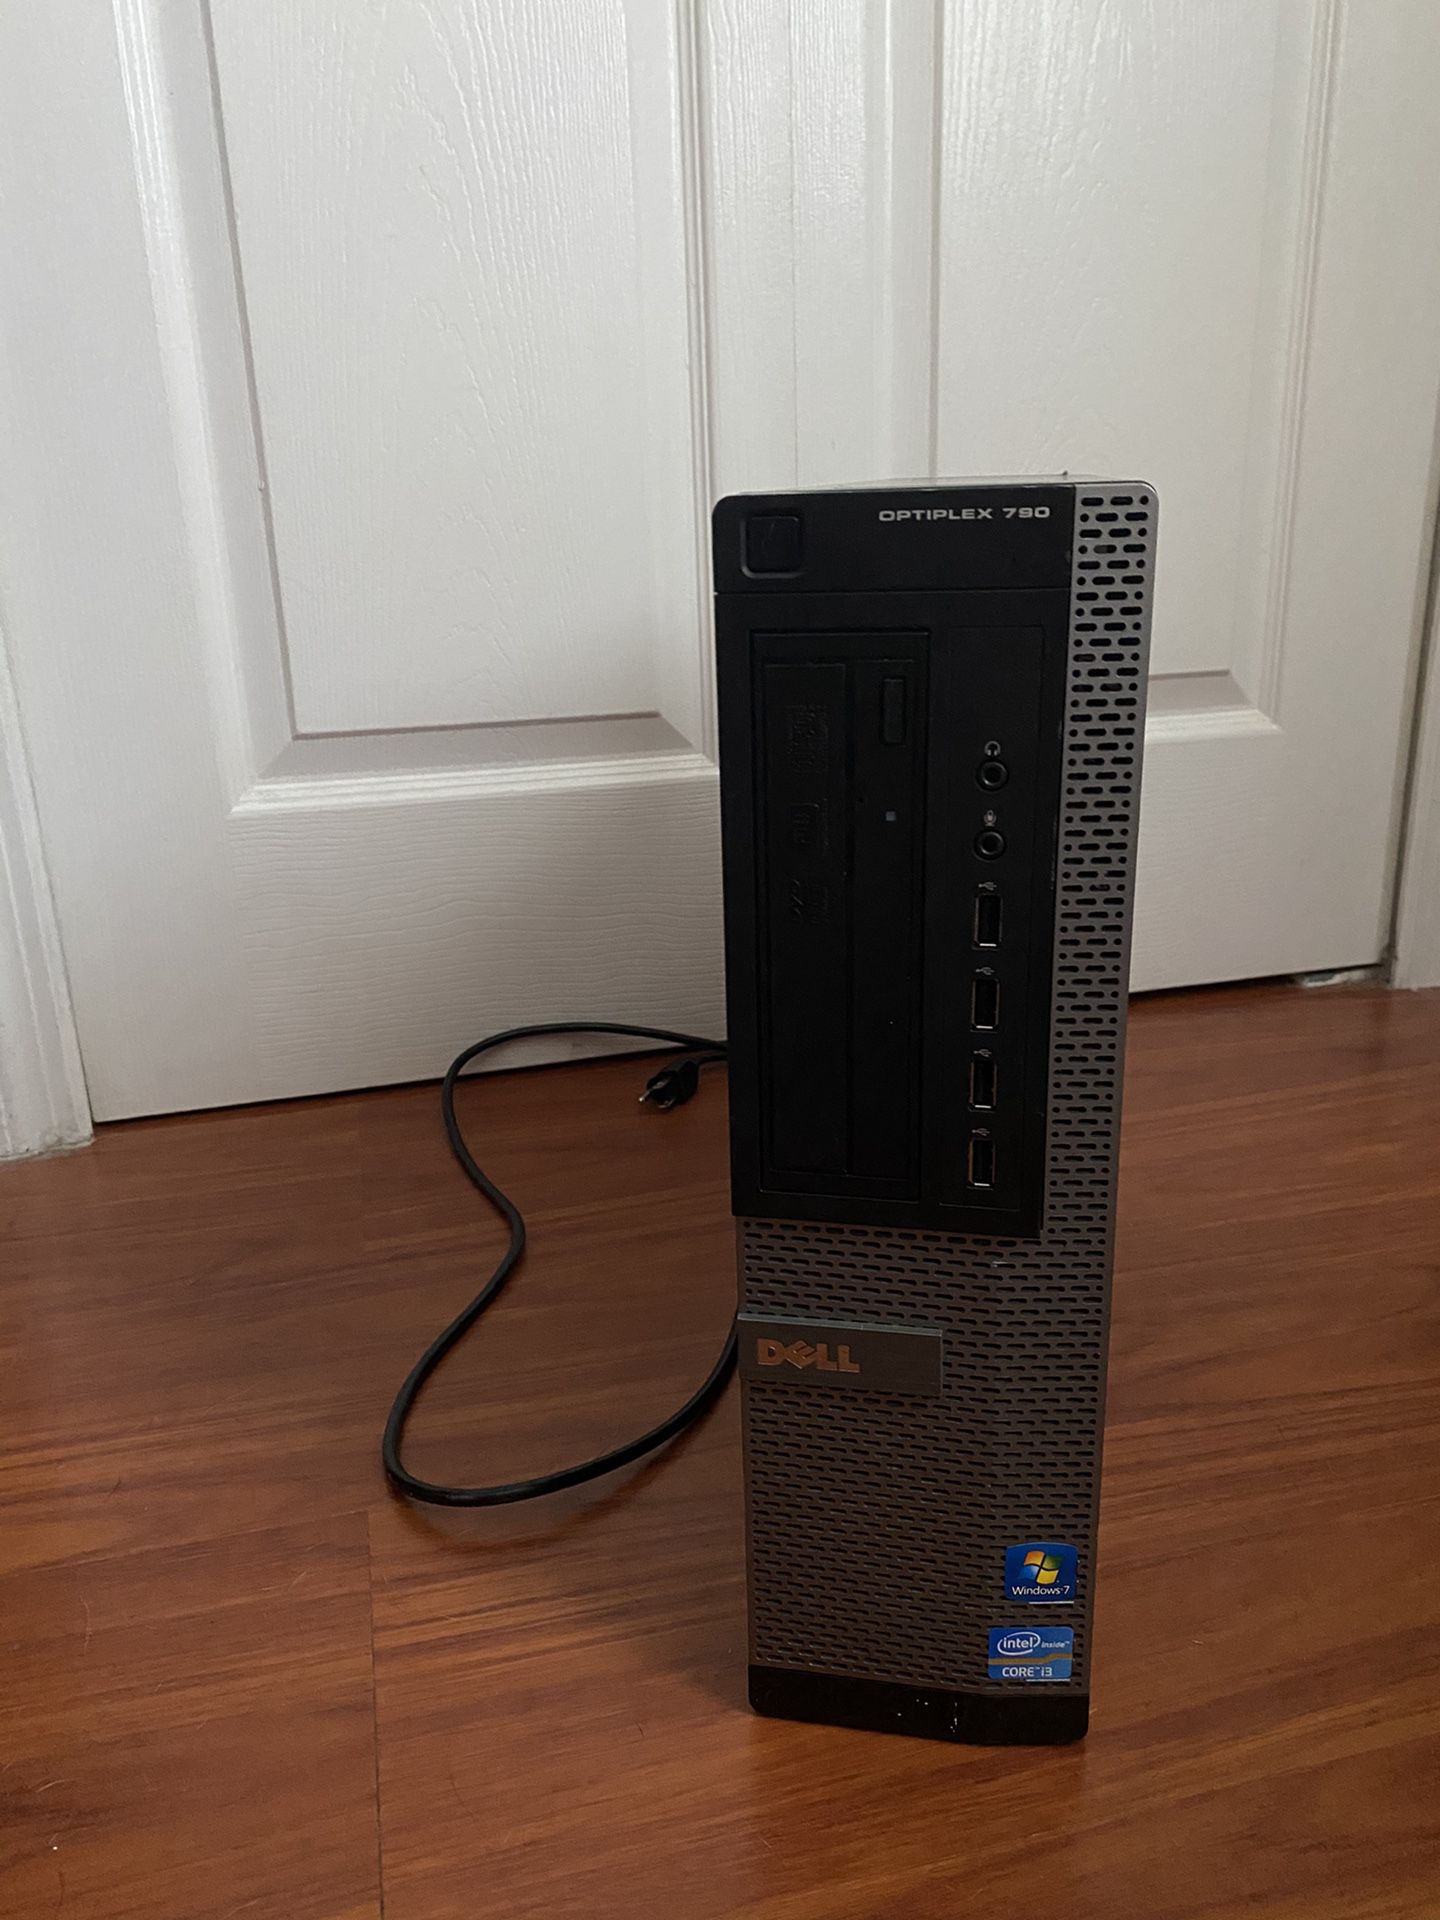 Upgarded Dell Optiplex 790 computer tower